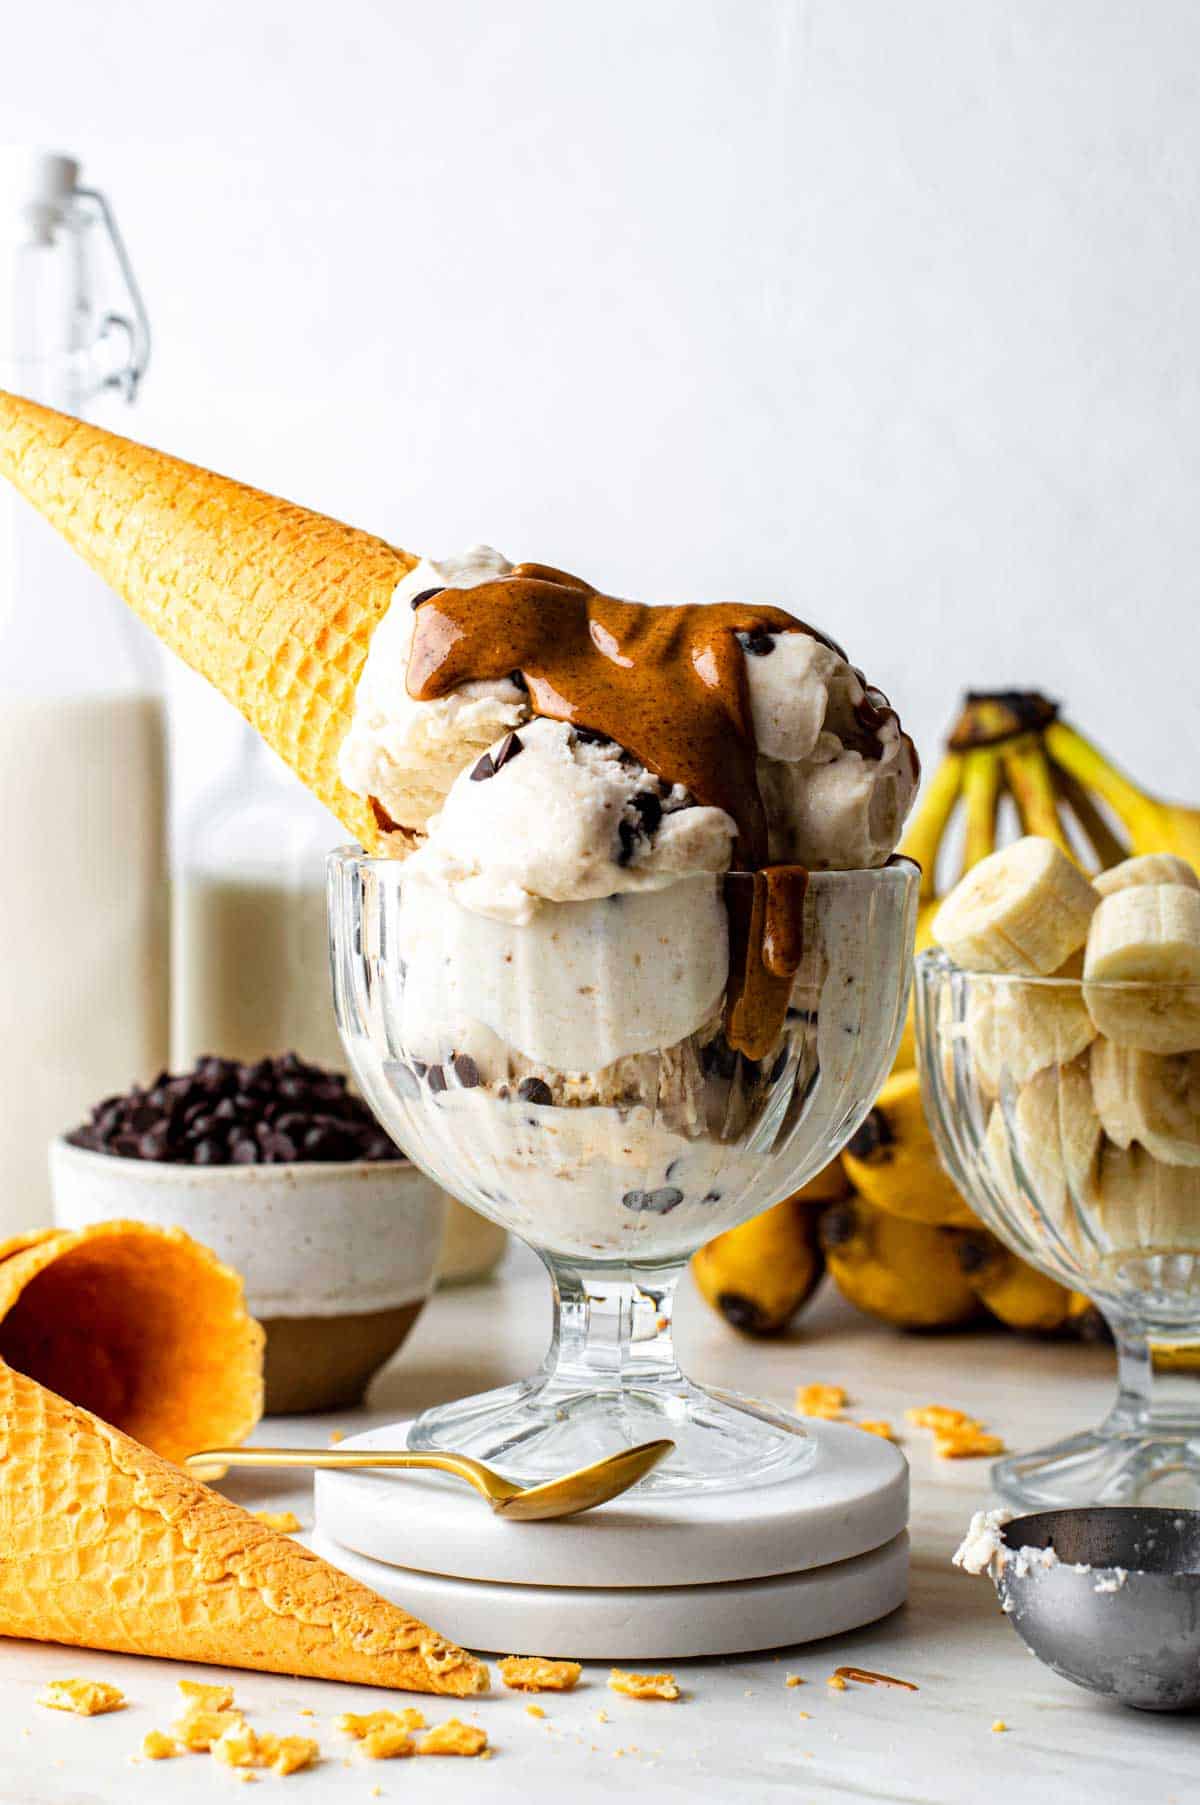 Scoops of banana nice cream mixed with chocolate chips in a bowl with a drizzle of peanut butter on top.